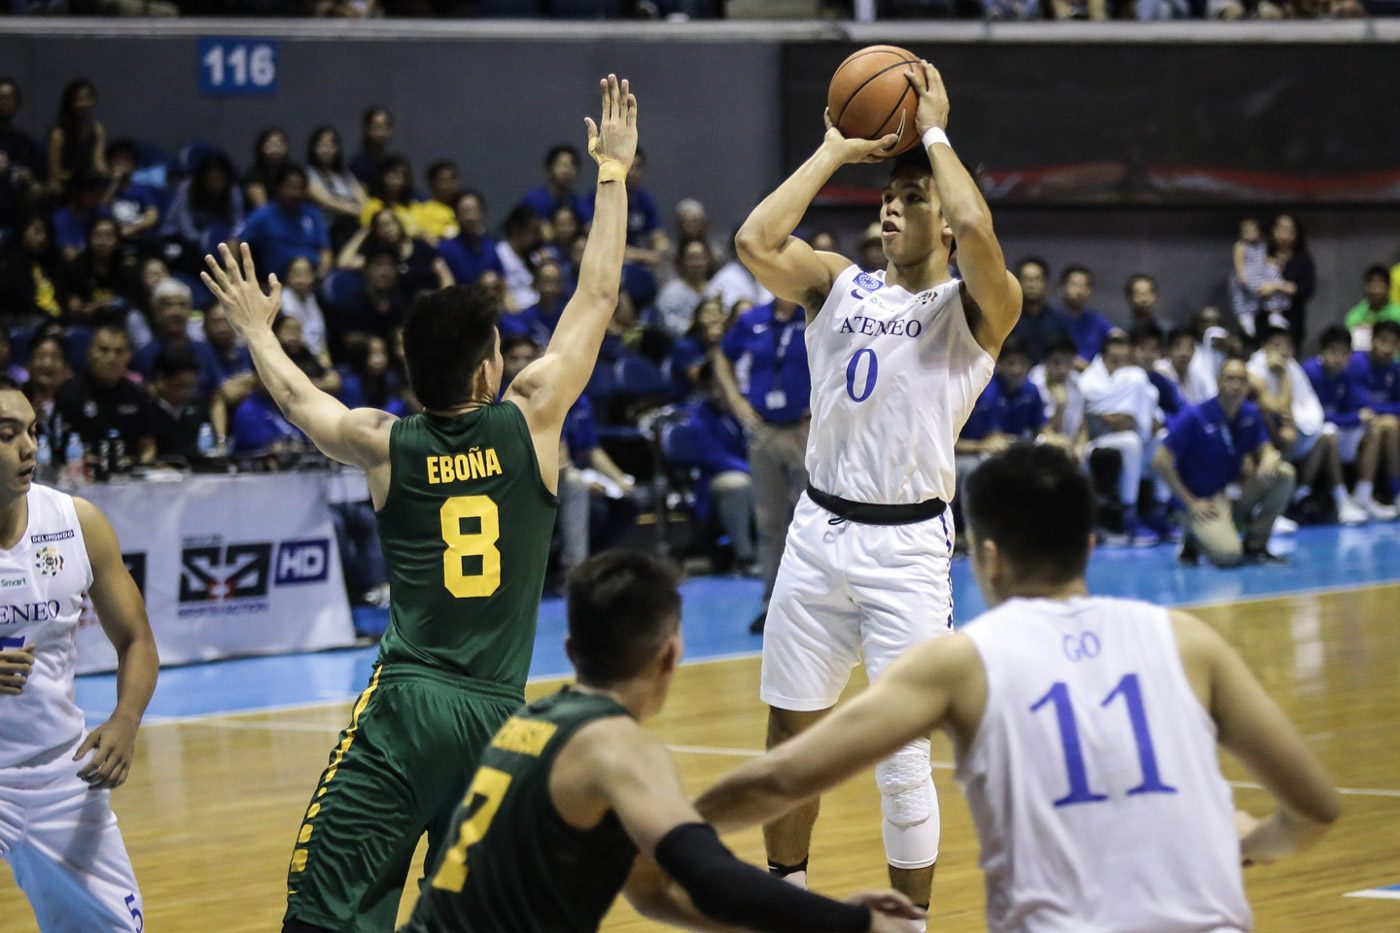 Ateneo Blue Eagles to ‘rediscover’ themselves before facing FEU in second semis meeting